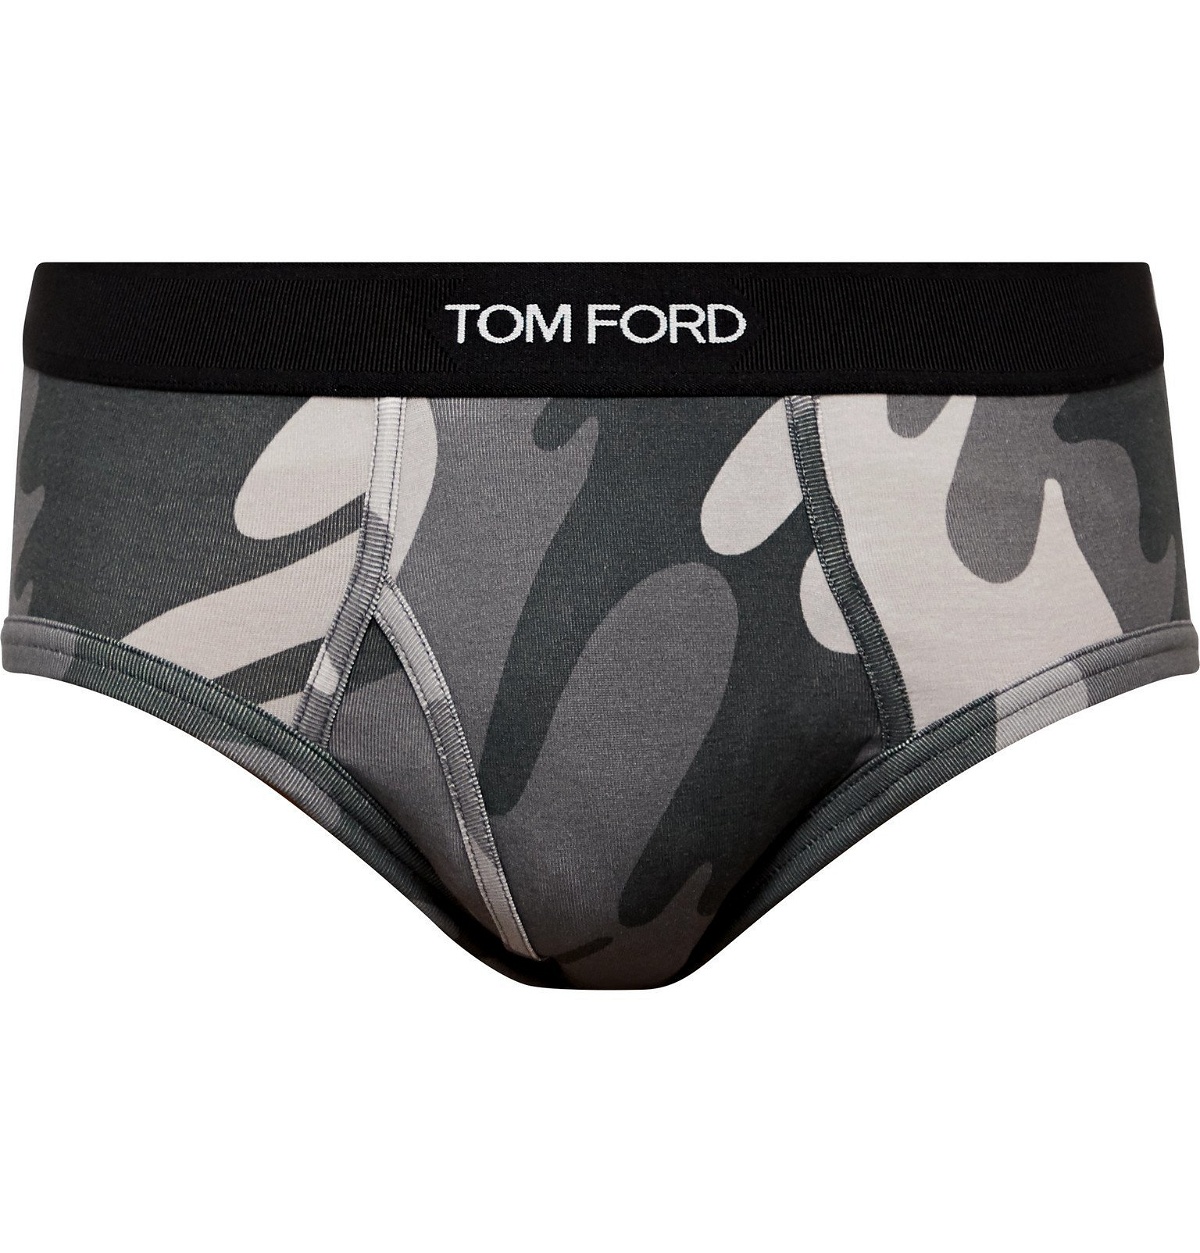 TOM FORD - Camouflage-Print Stretch-Cotton Briefs - Gray TOM FORD